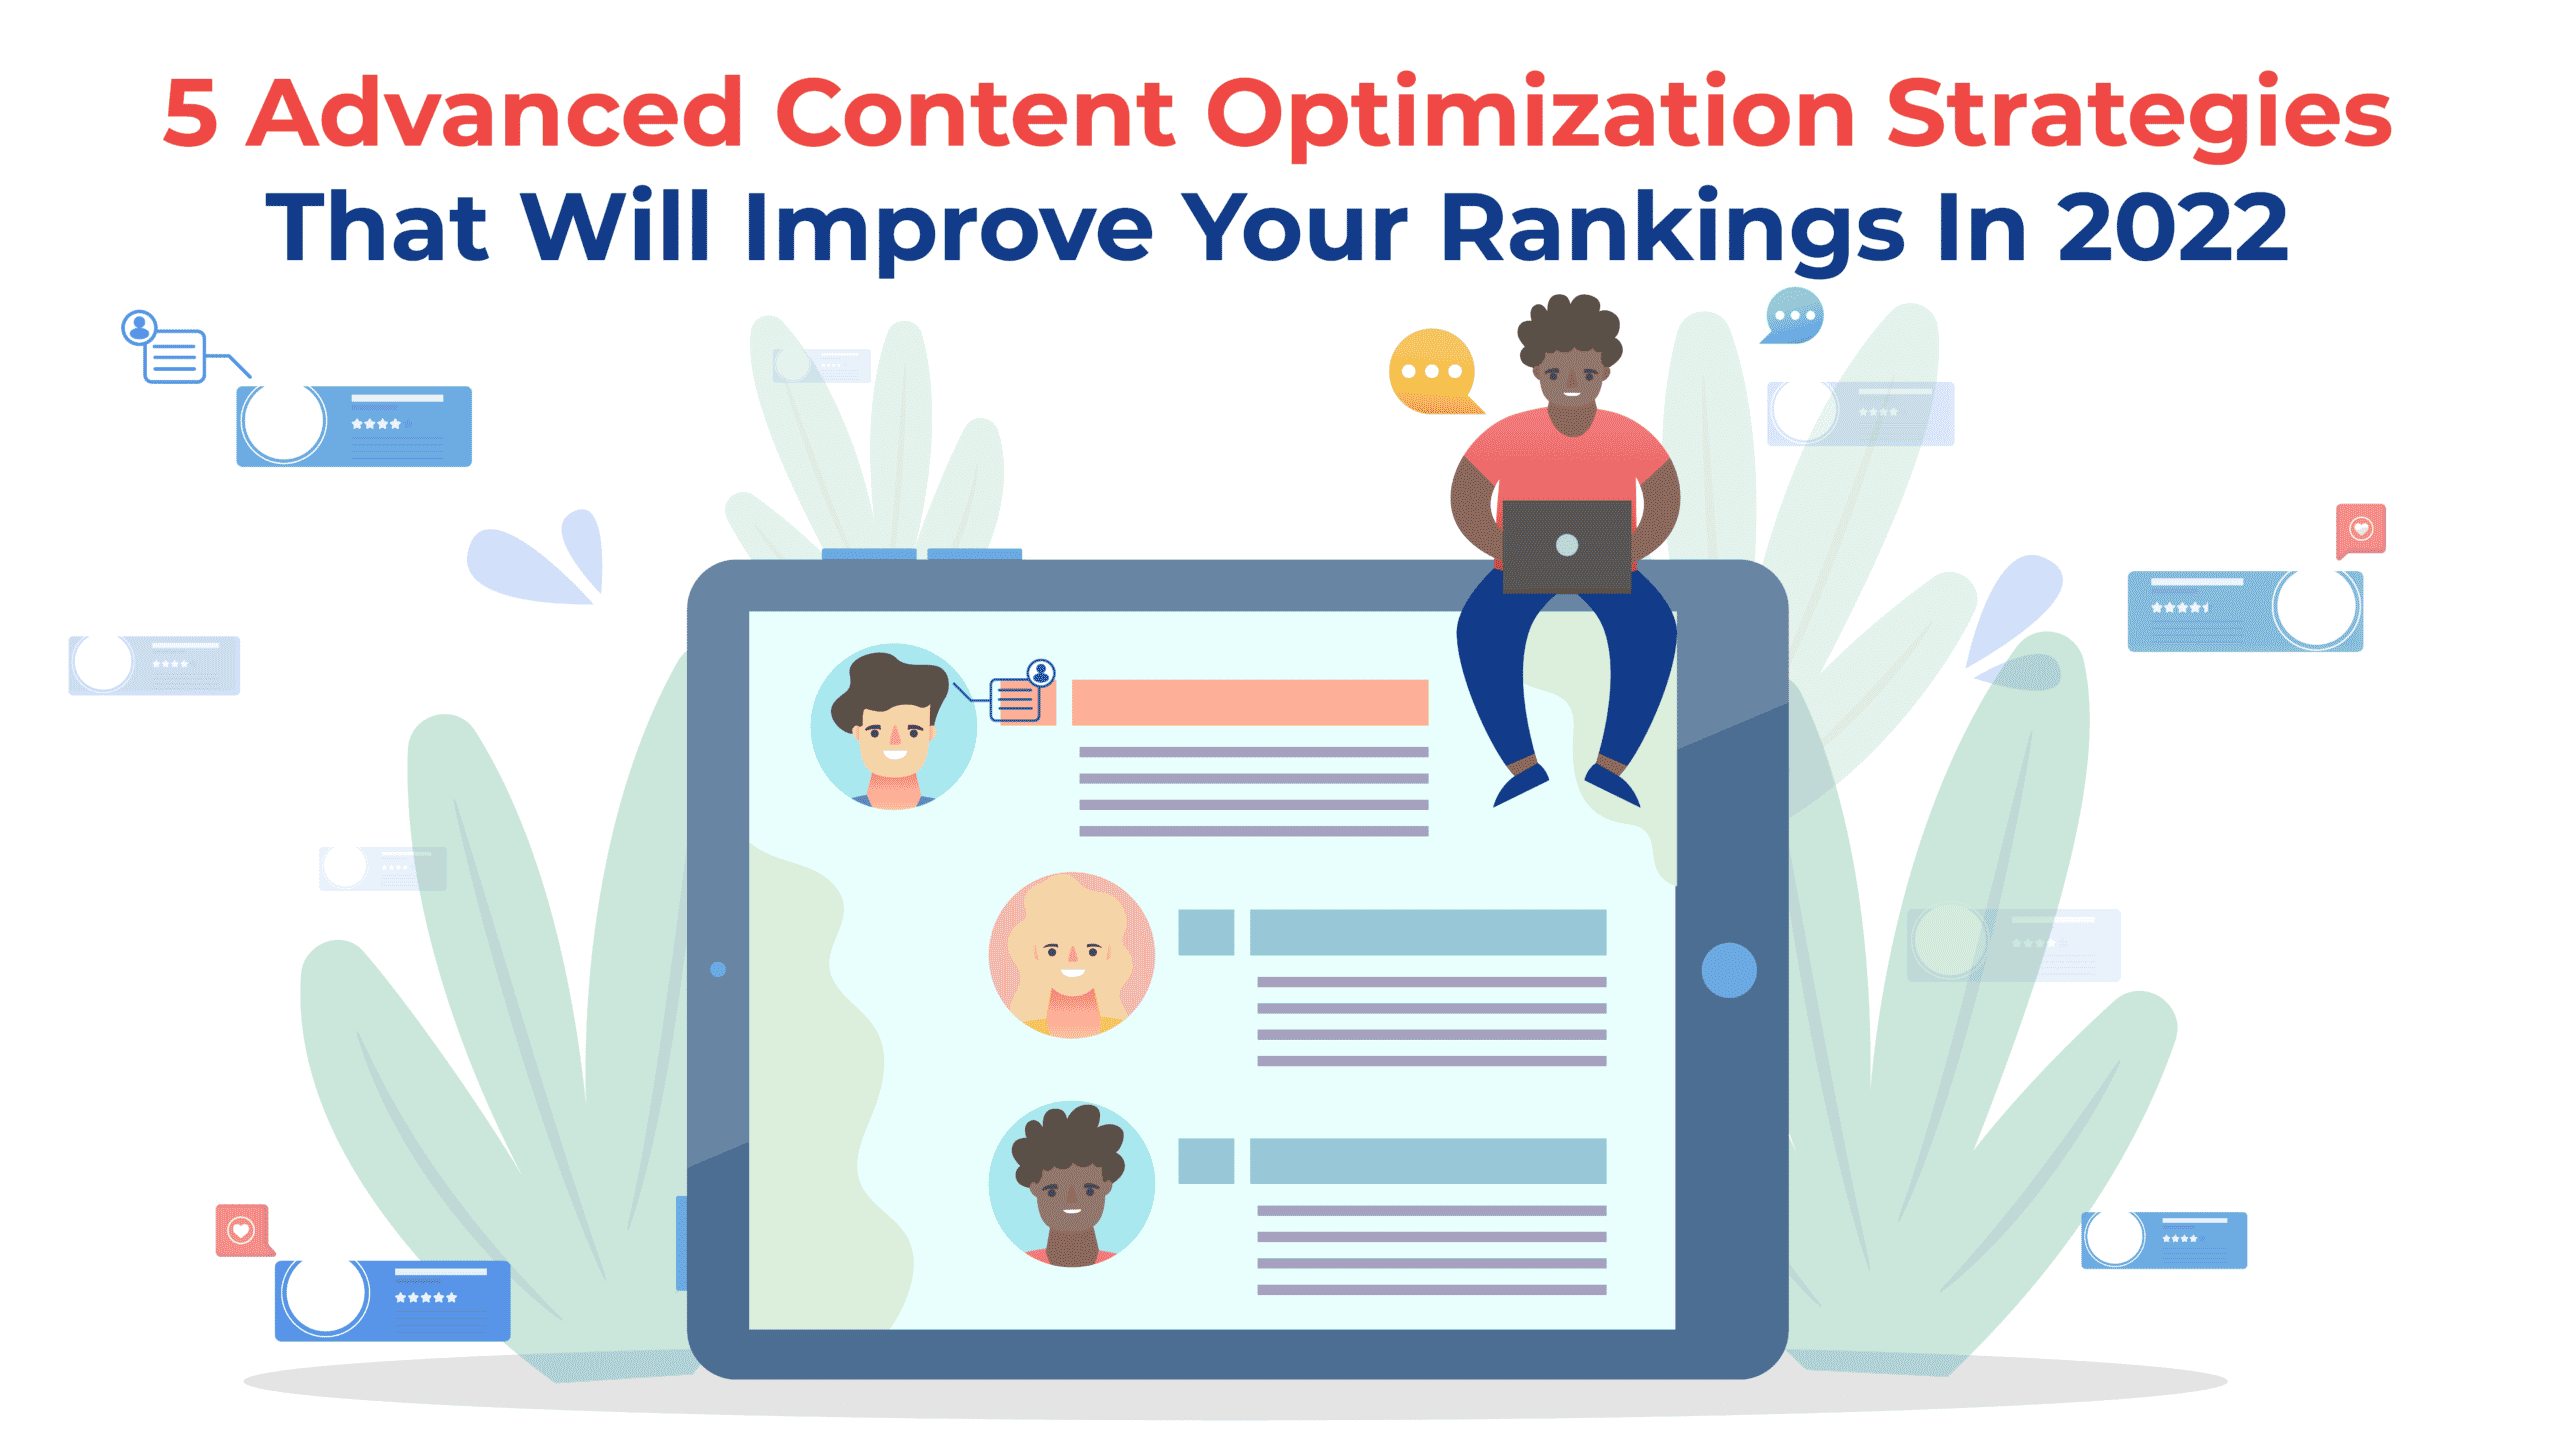 5 Advanced Content Optimization Strategies That Will Improve Your Rankings In 2022